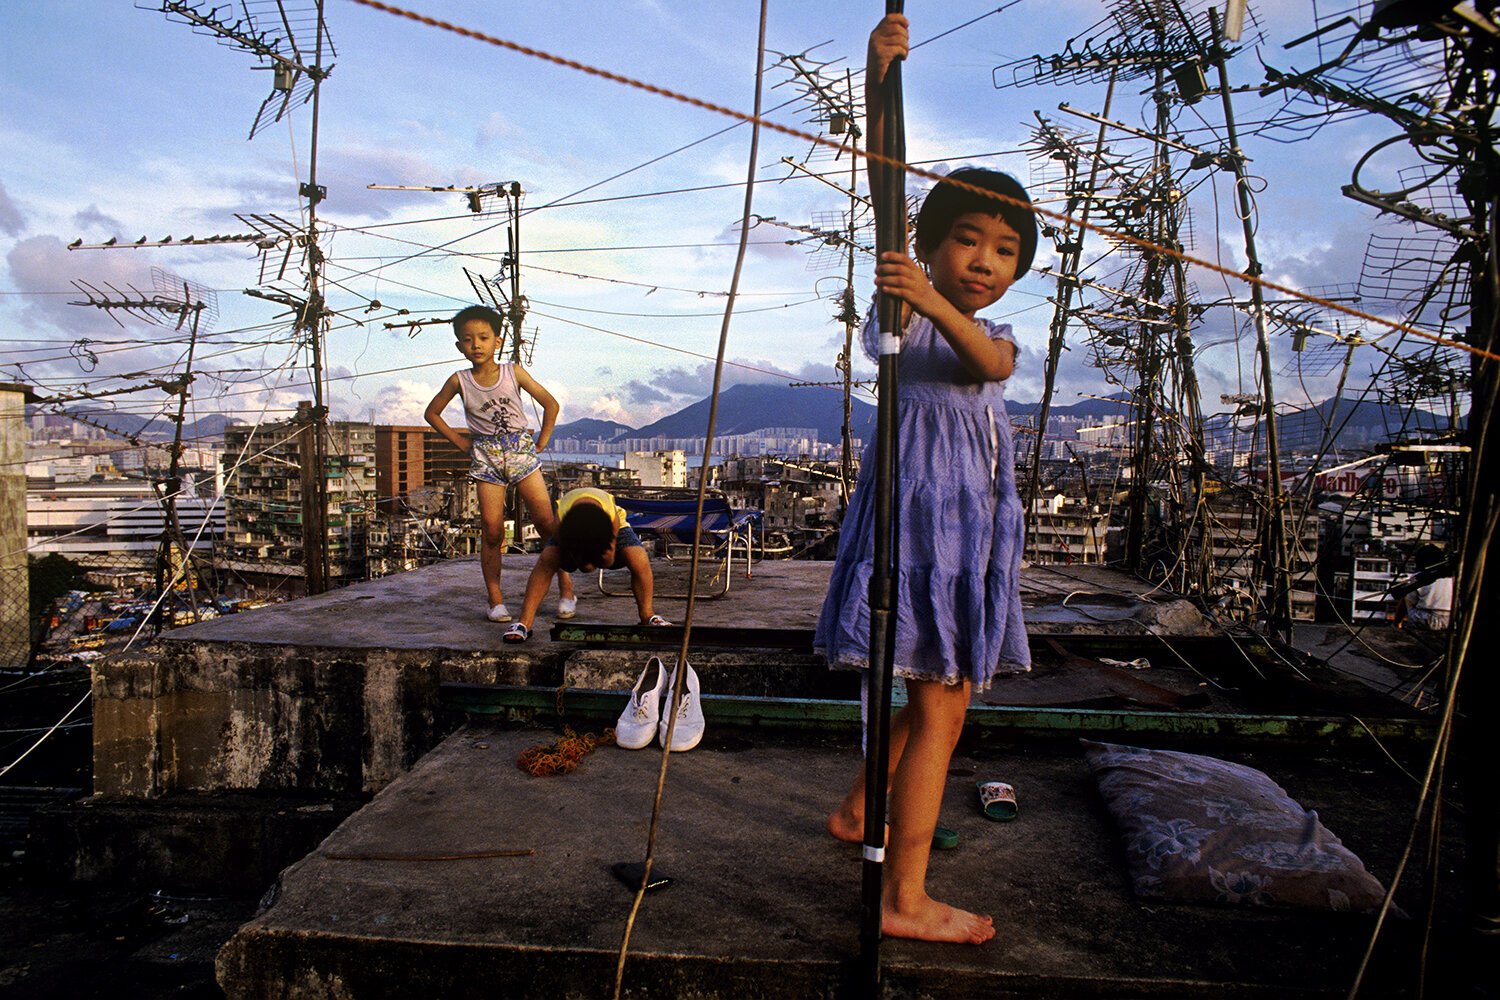 "Kids on Kowloon Walled City Rooftop. 1990" from the Series “City of Darkness Revisited” by Greg Girard | Canon F-1, Fujichrome Provia Film